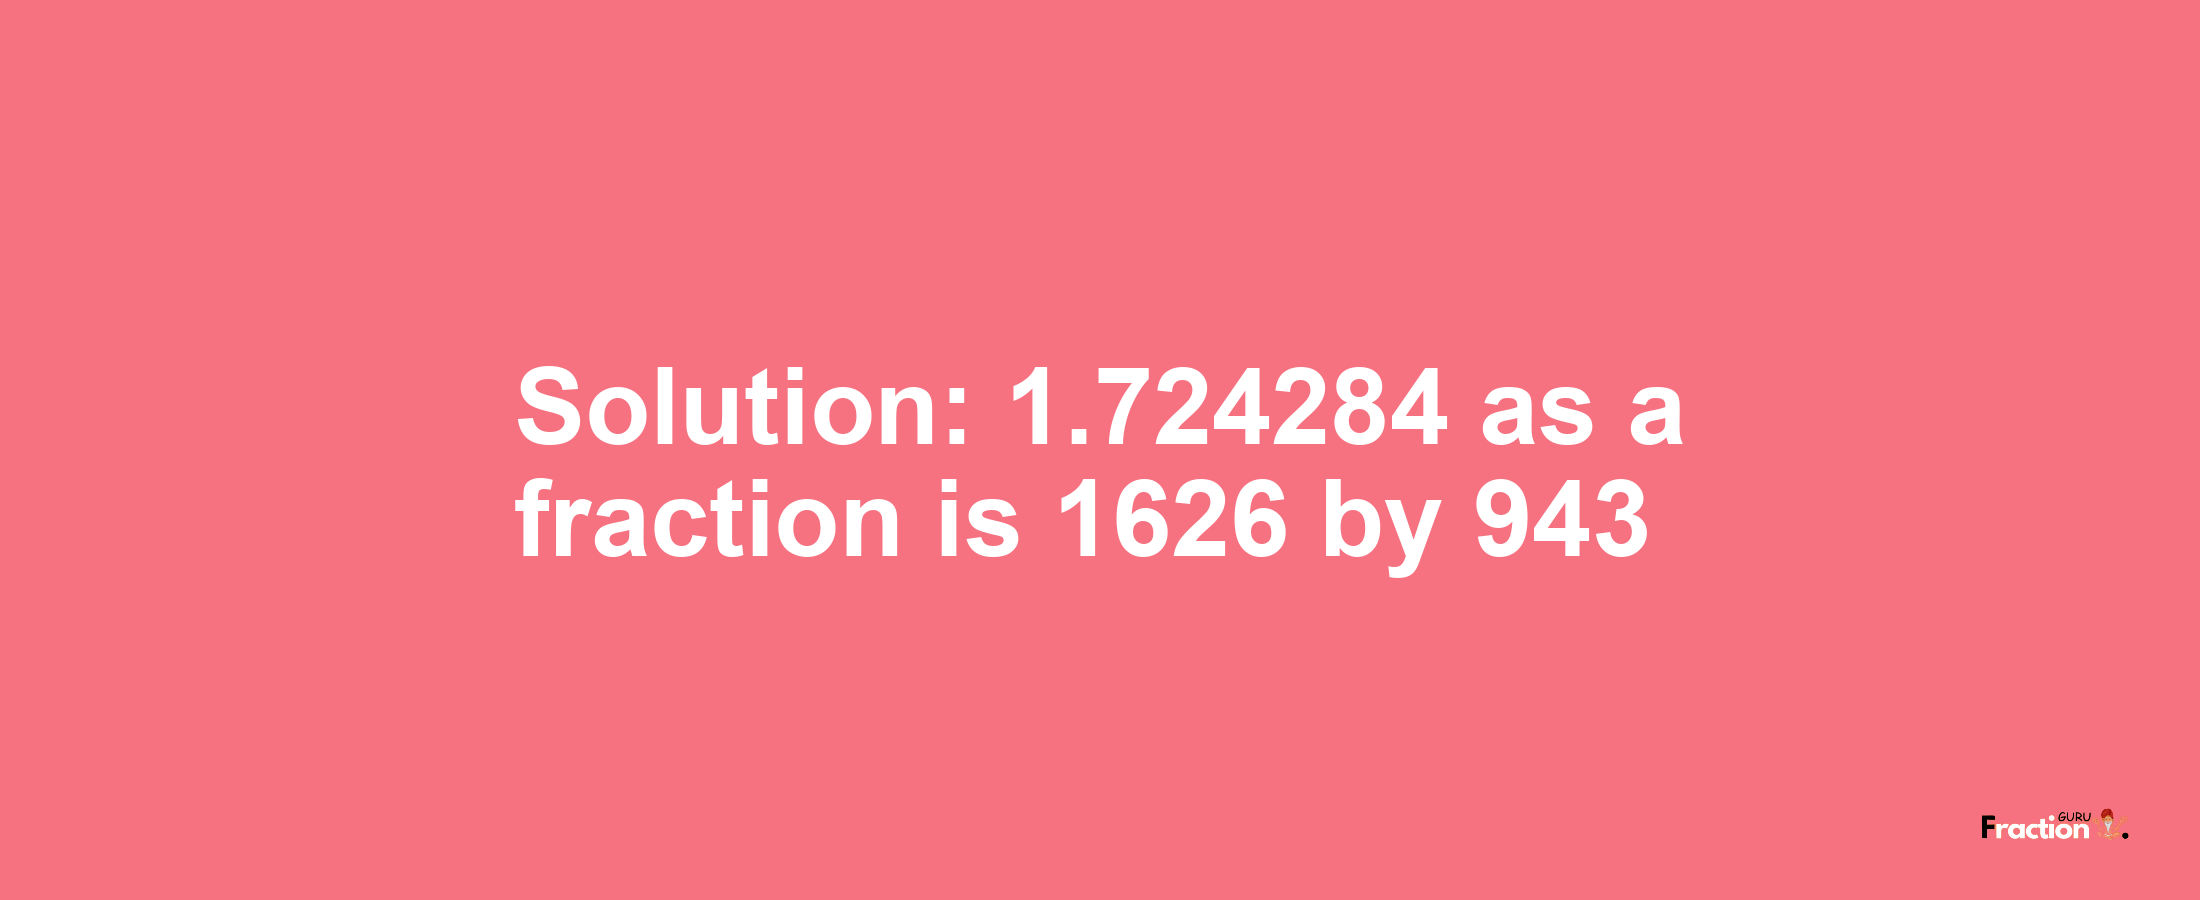 Solution:1.724284 as a fraction is 1626/943